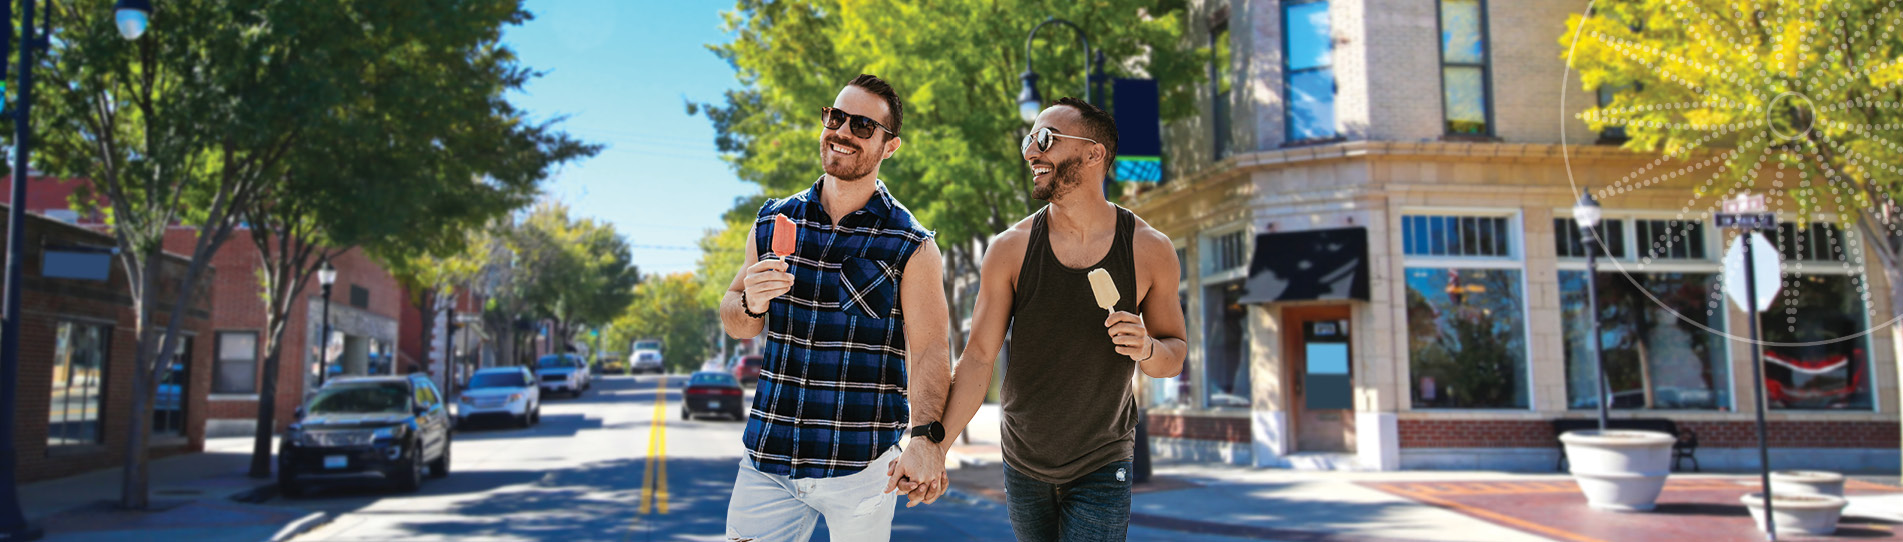 two men smiling and walking with ice cream